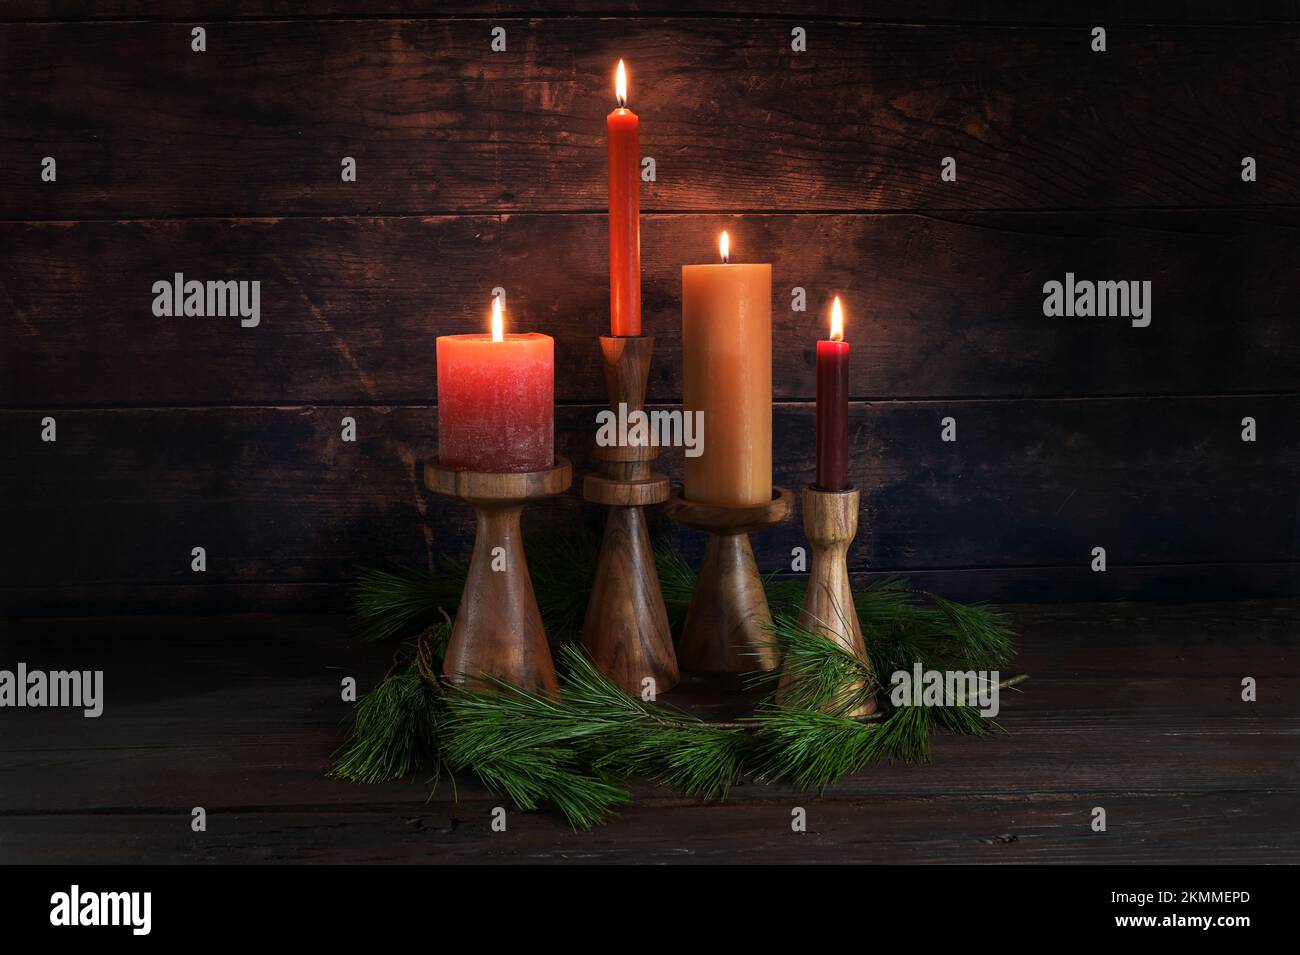 Four different candles in warm colors on wooden stands for Advent with some pine branches against a dark rustic background of wood, copy space, select Stock Photo